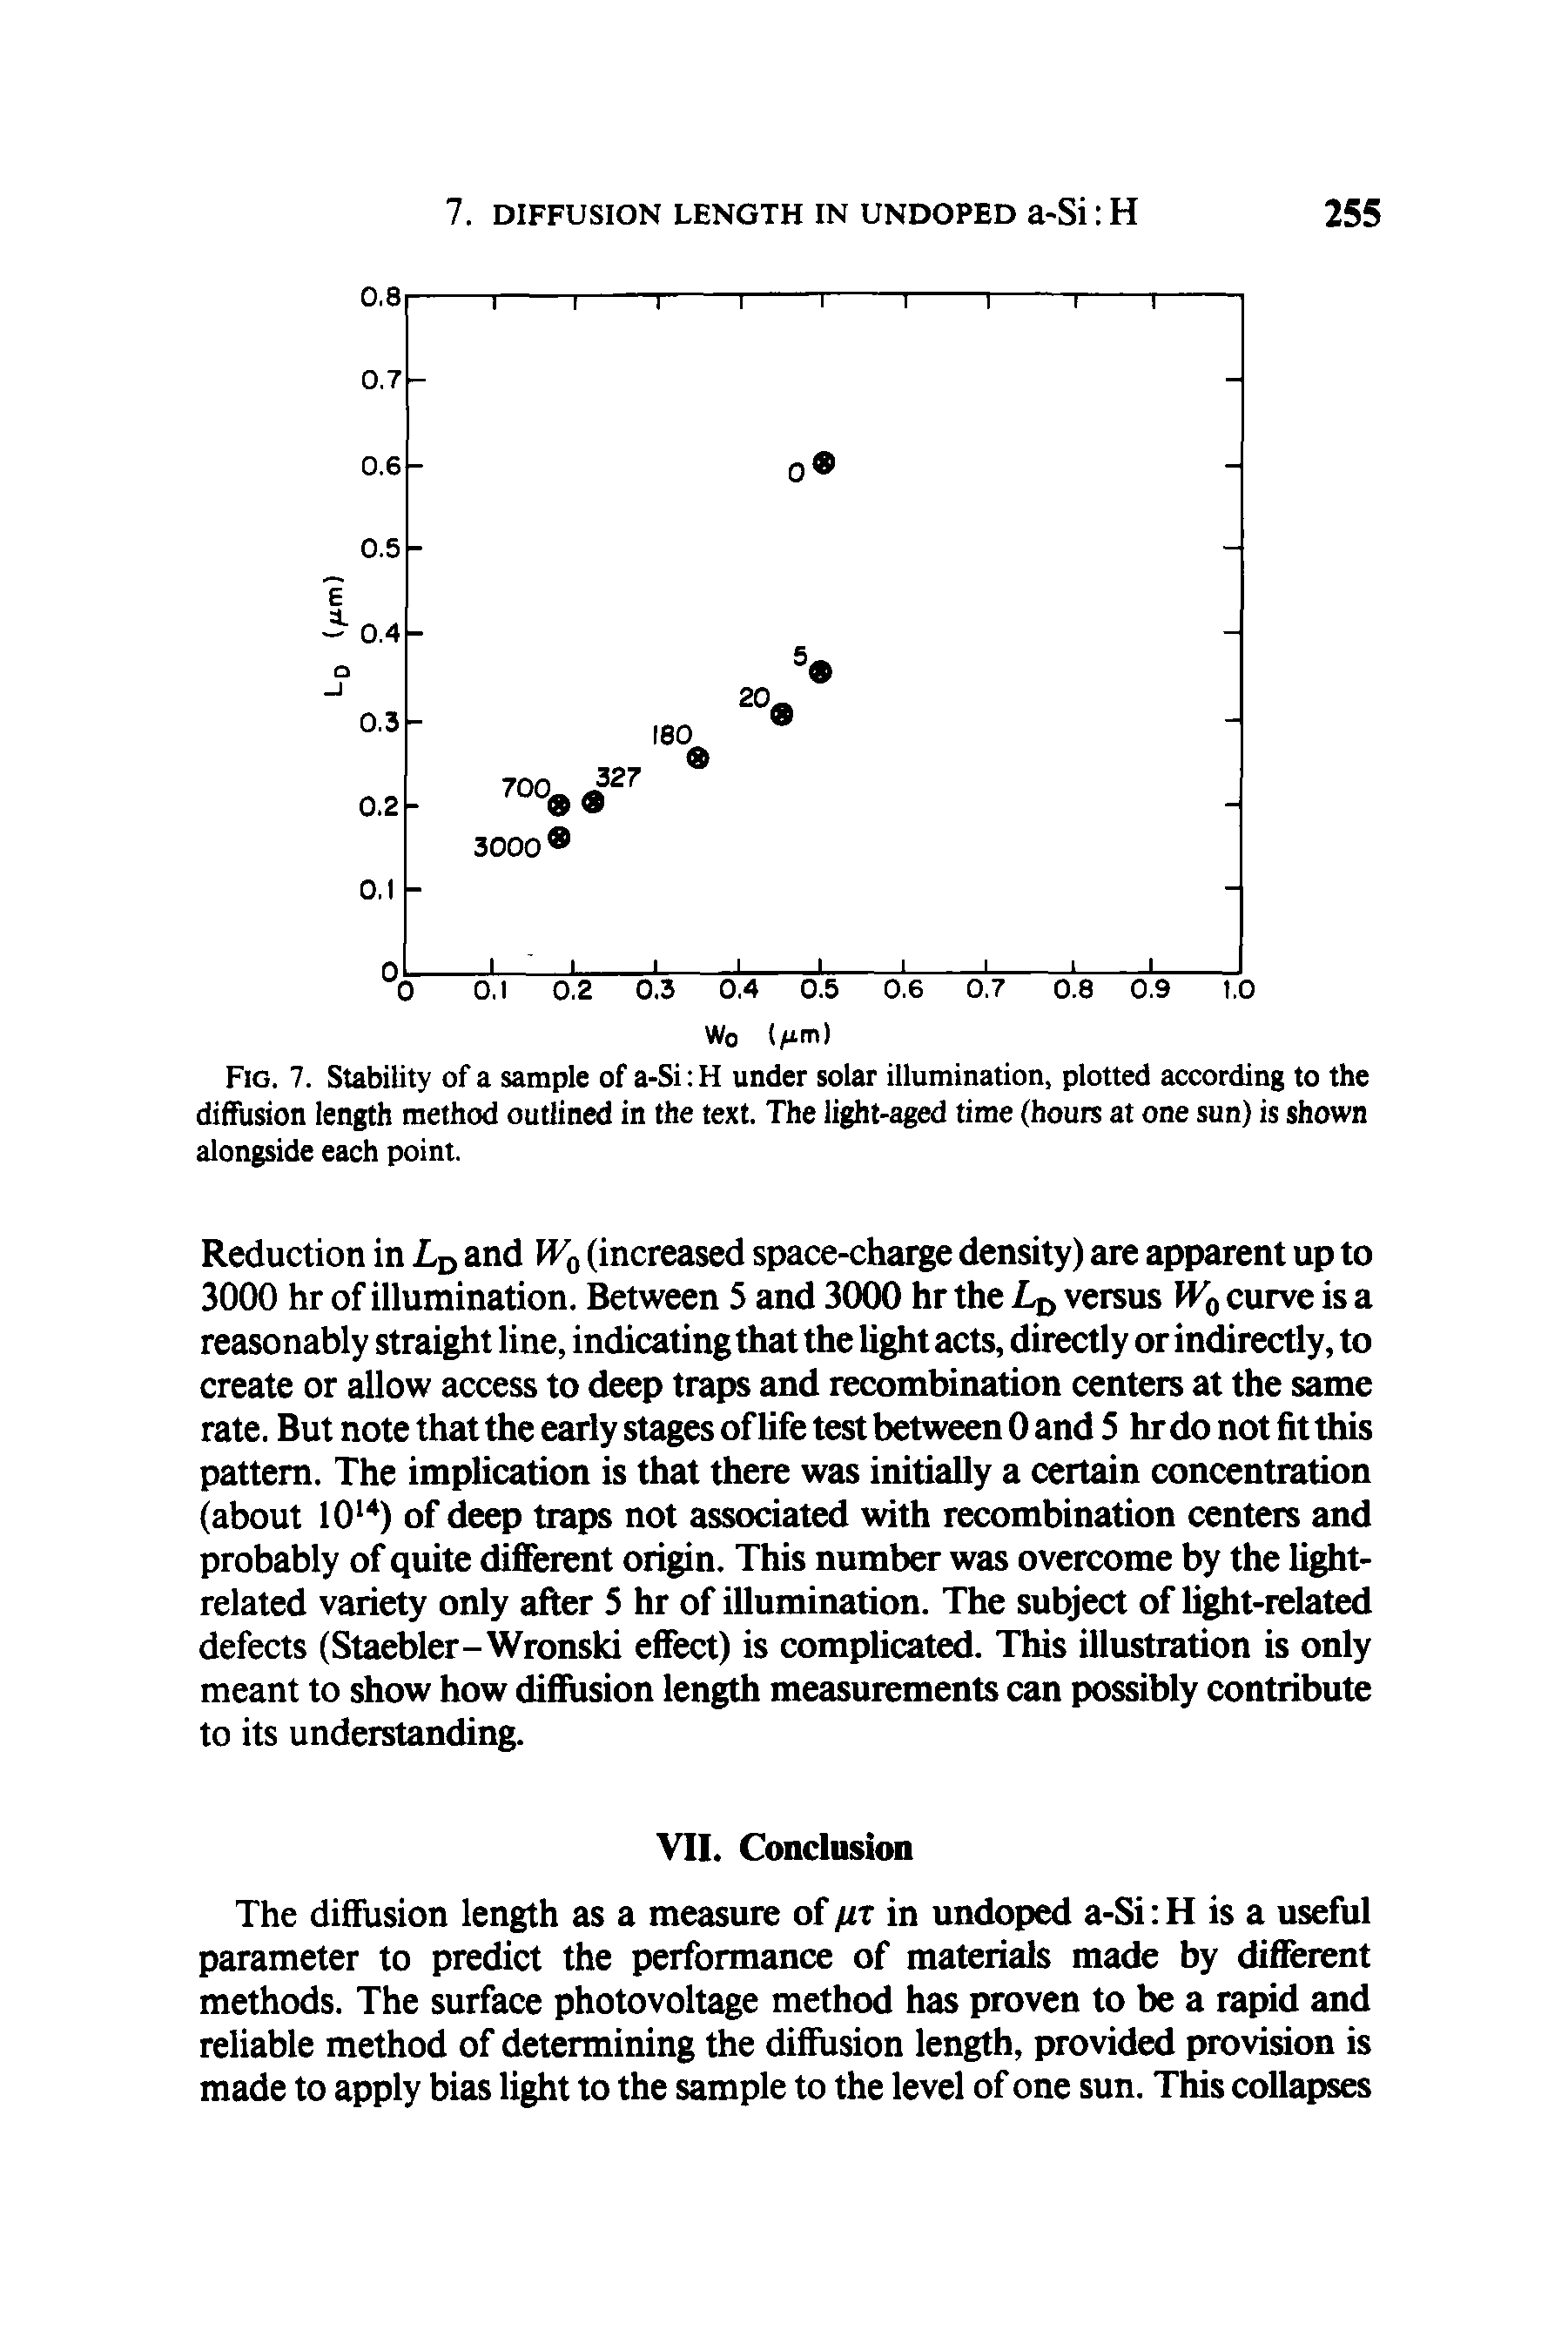 Fig. 7. Stability of a sample of a-Si H under solar illumination, plotted according to the diffusion length method outlined in the text. The light-aged time (hours at one sun) is shown alongside each point.